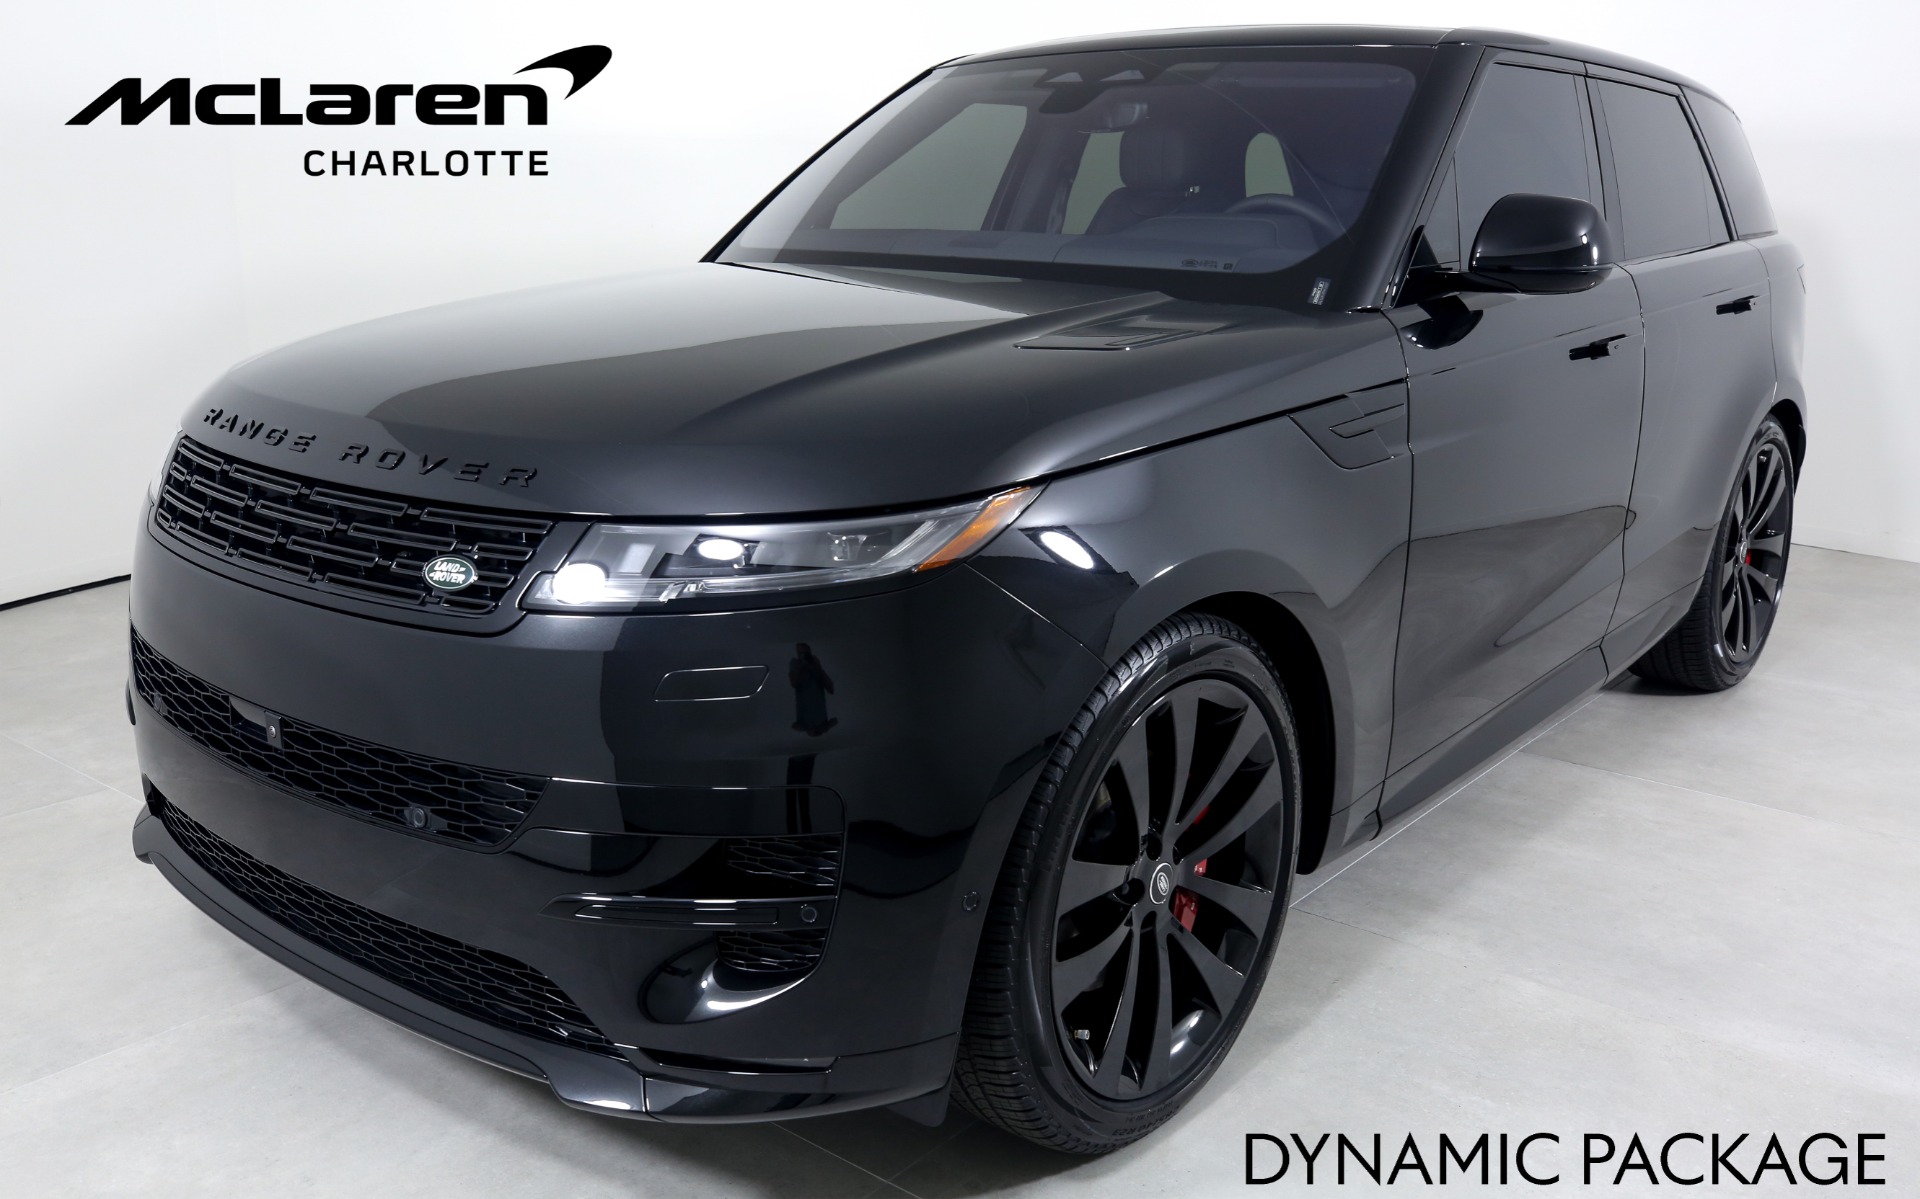 2023 Land Rover Range Rover Sport Prices, Reviews, and Pictures